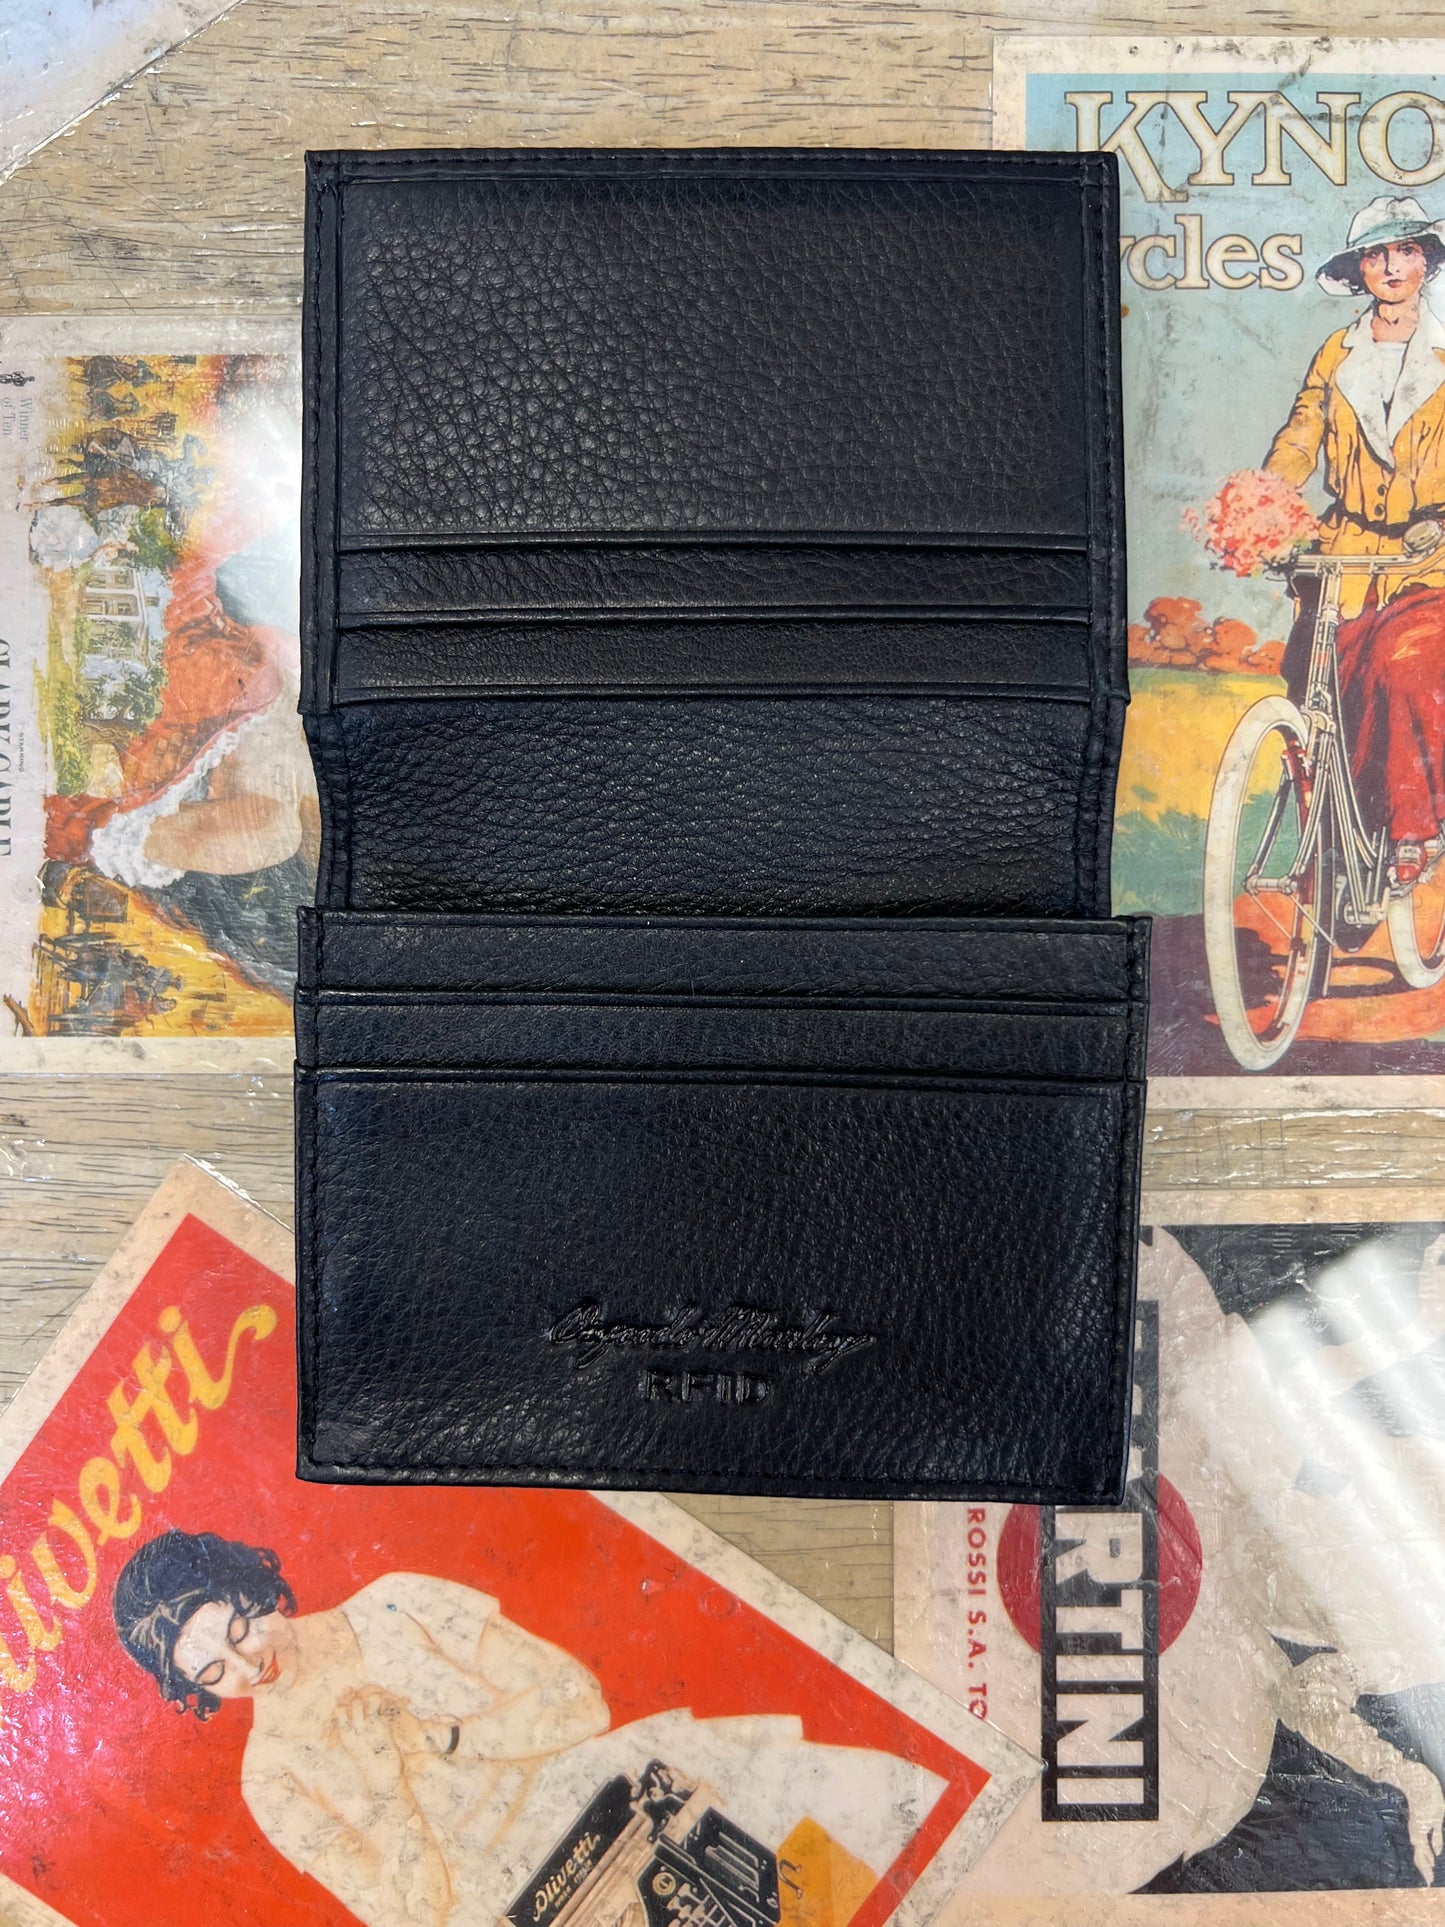 Osgoode Marley RFID Leather Gusset Card Case Wallet with ID Compartment